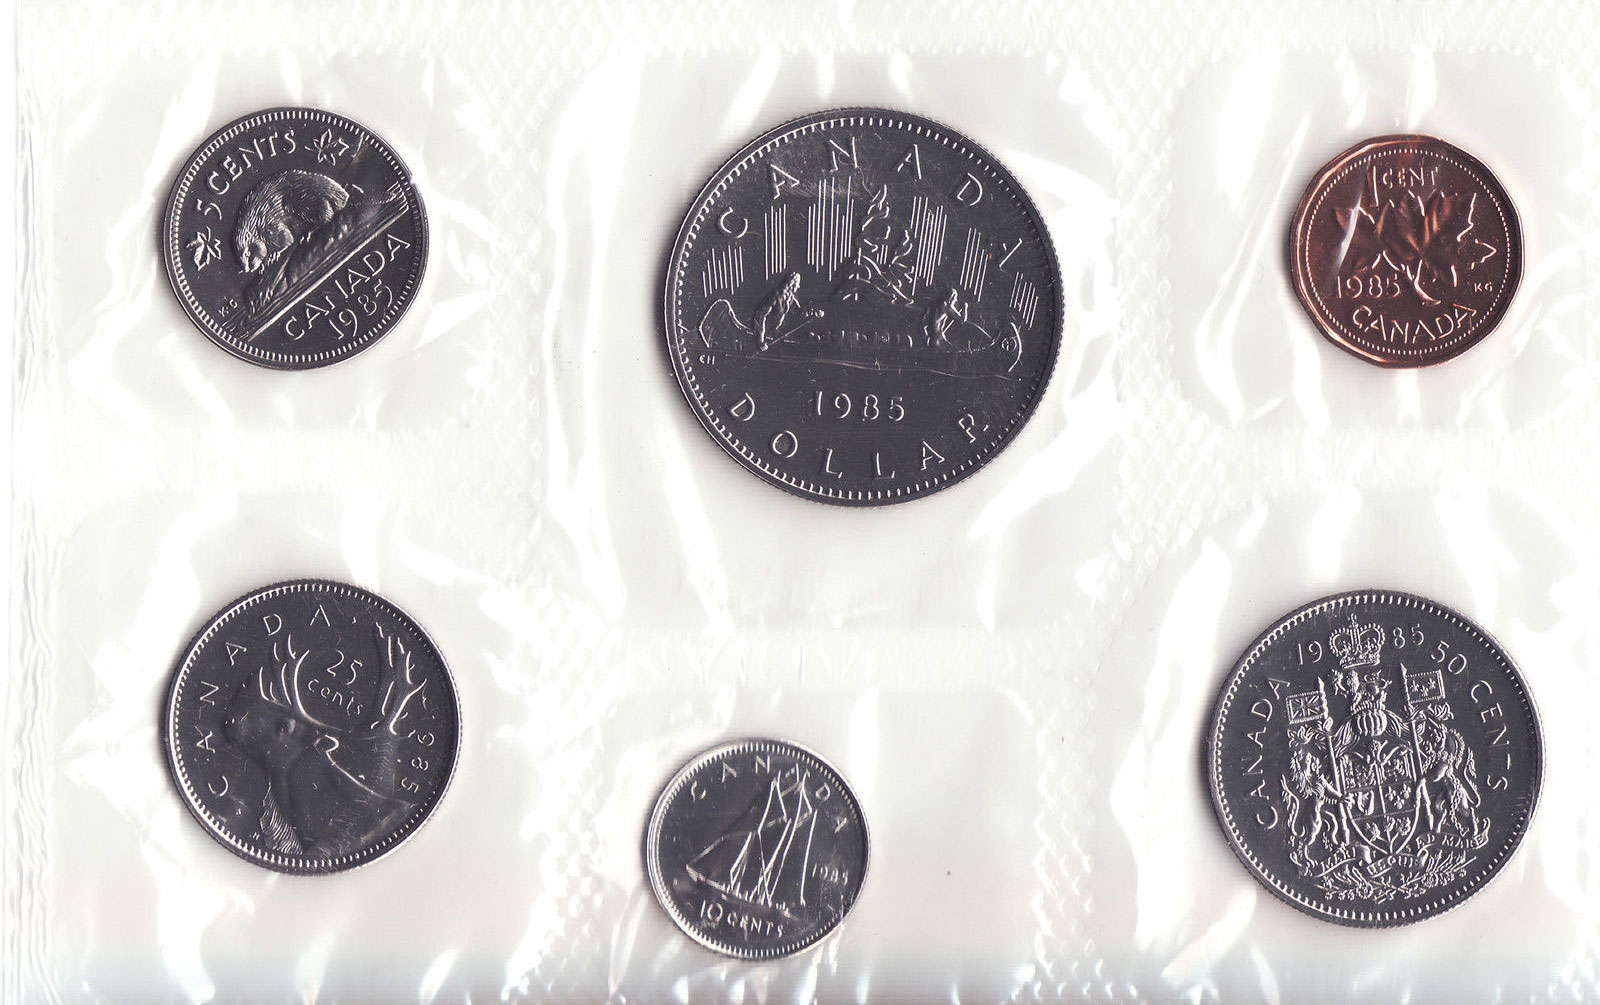 Details about   Canada 1985 Proof Like PL Coin Set Experimental Packaging for European Market 